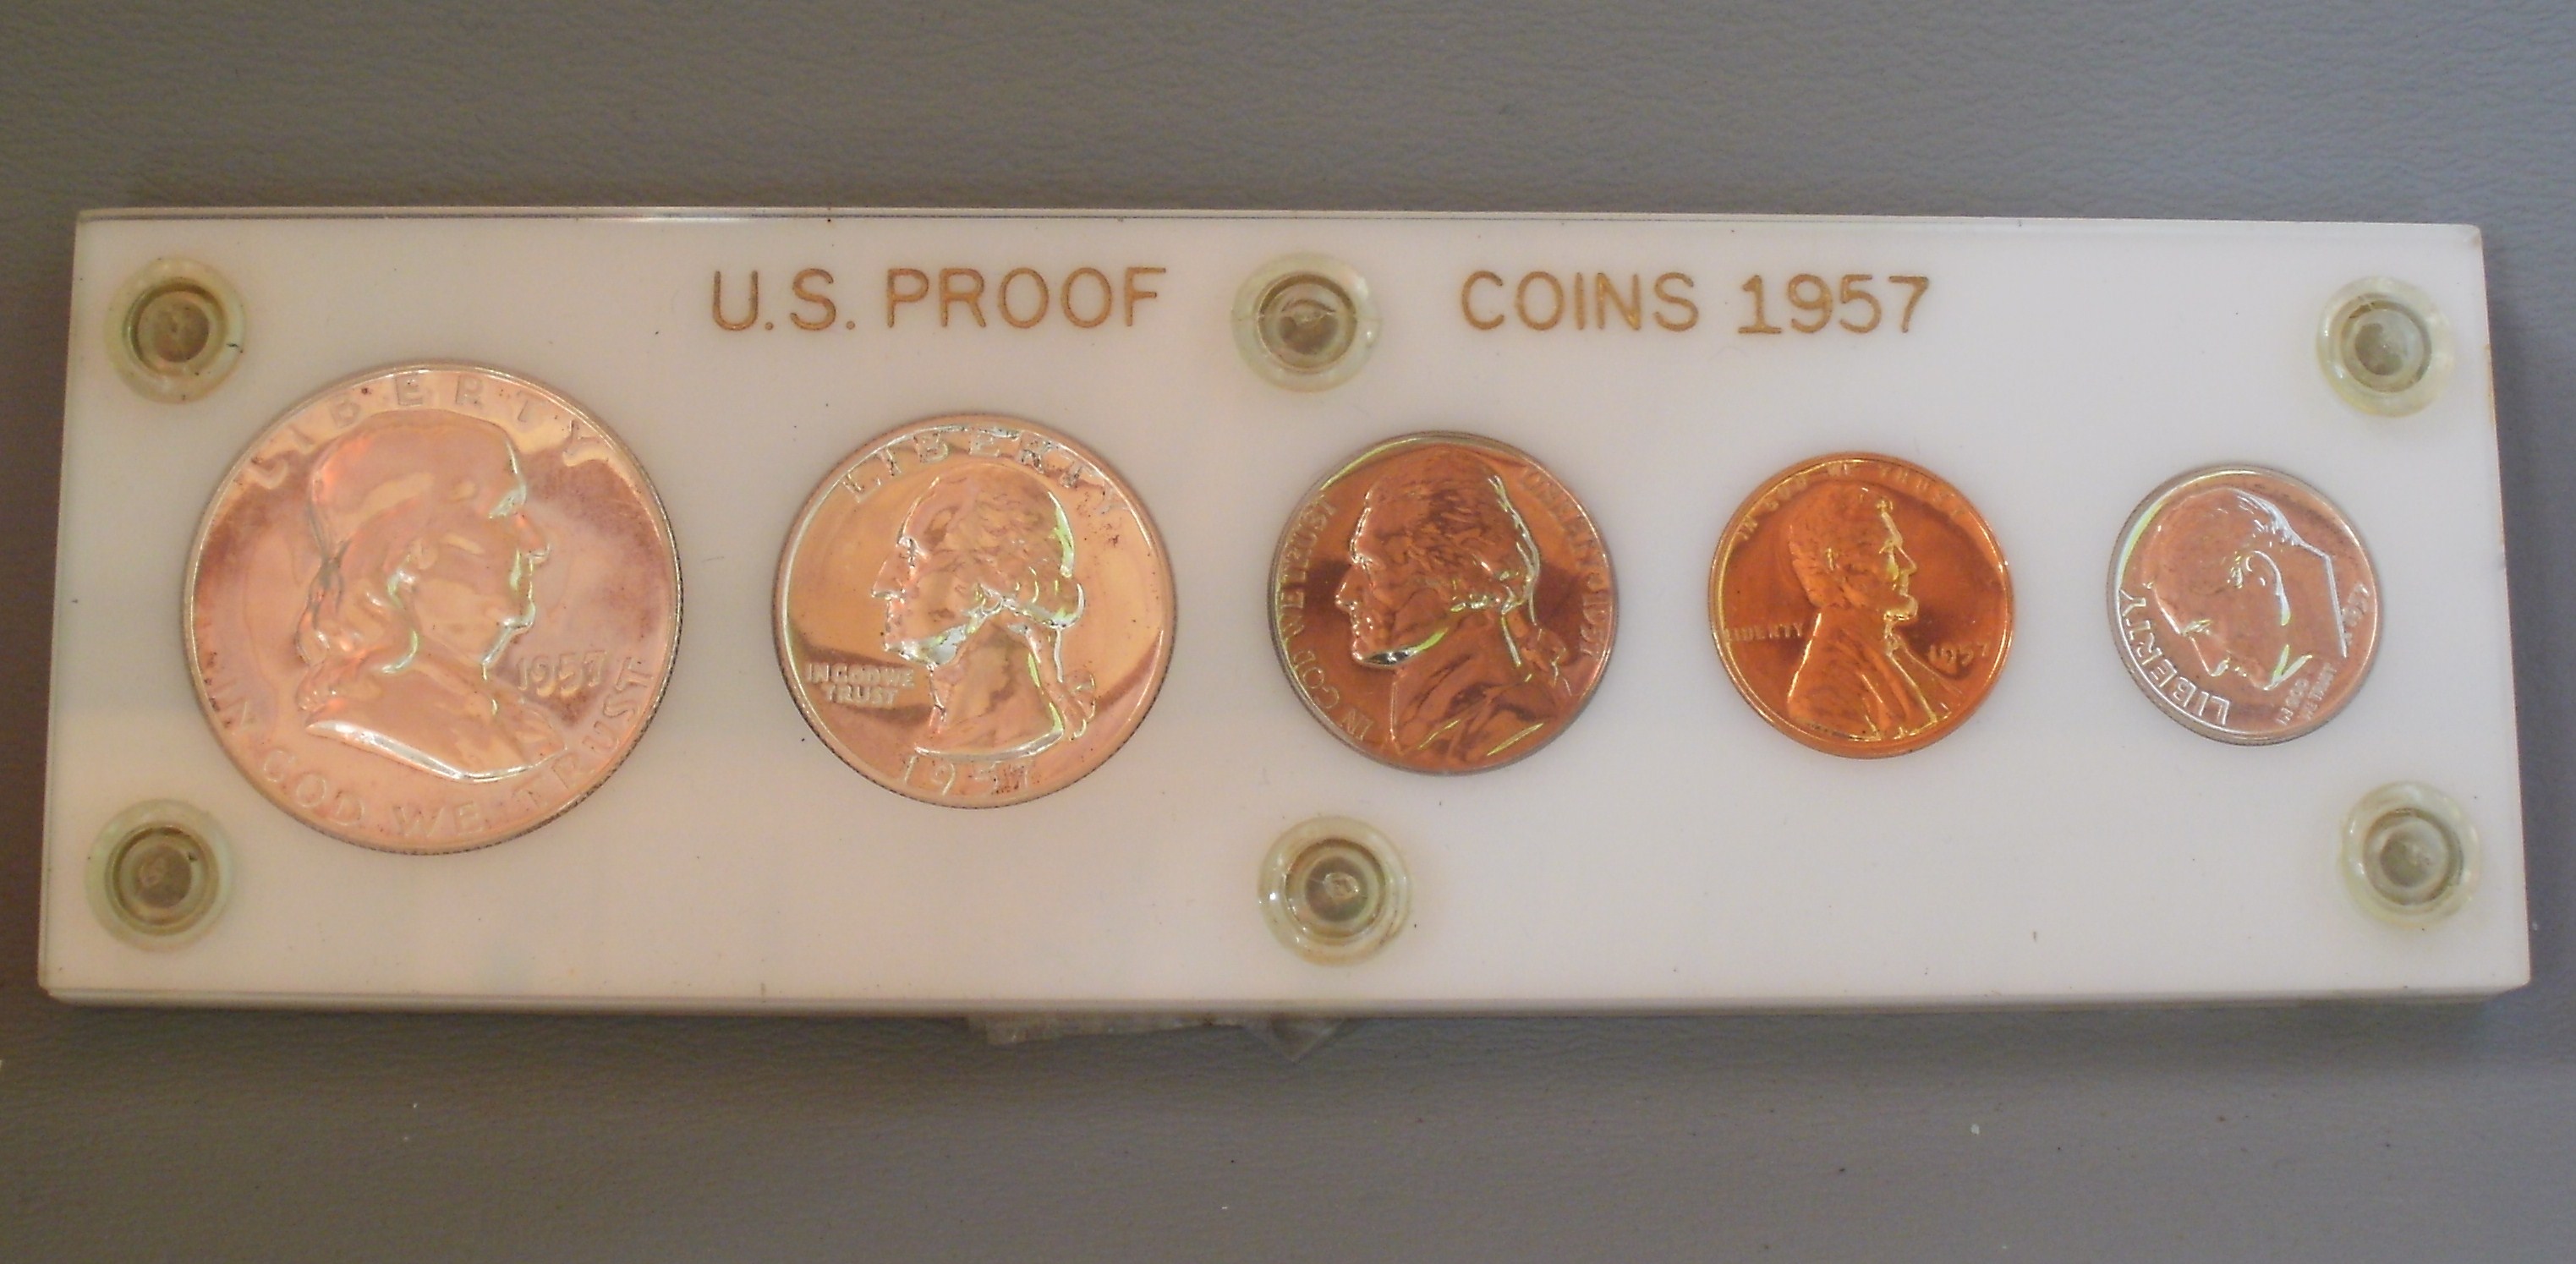 1957 US PROOF COIN SET